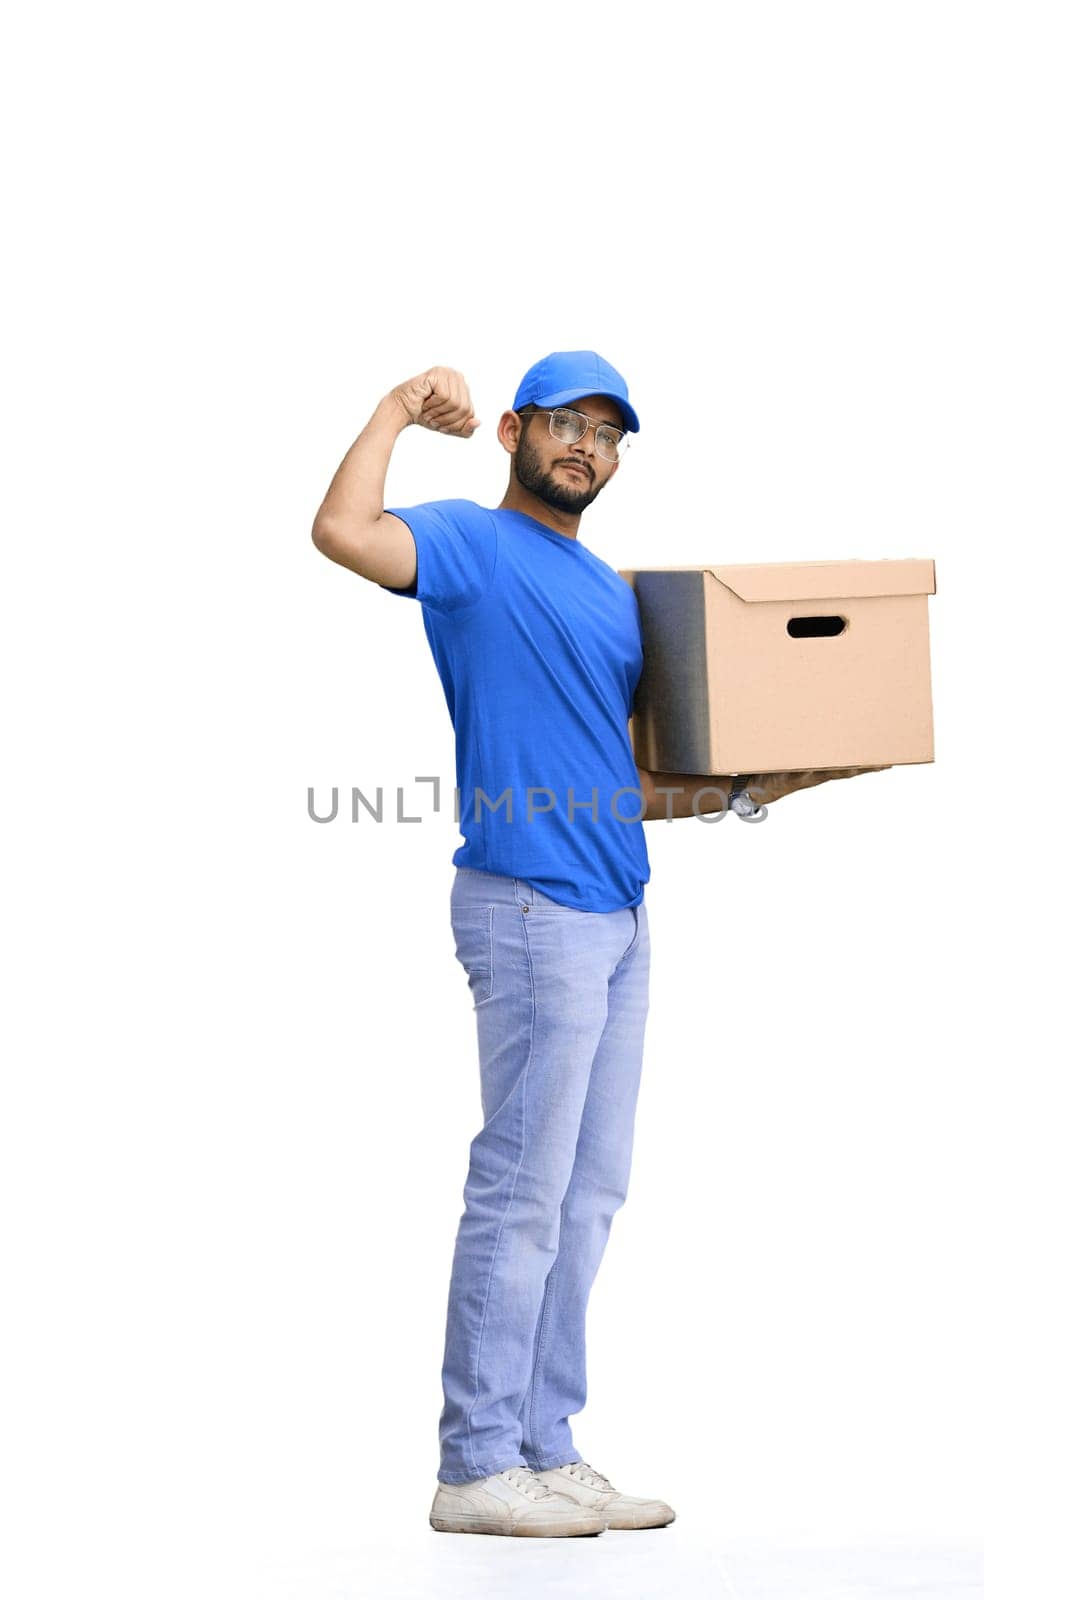 A male deliveryman, on a white background, in full height, with a box, shows strength by Prosto